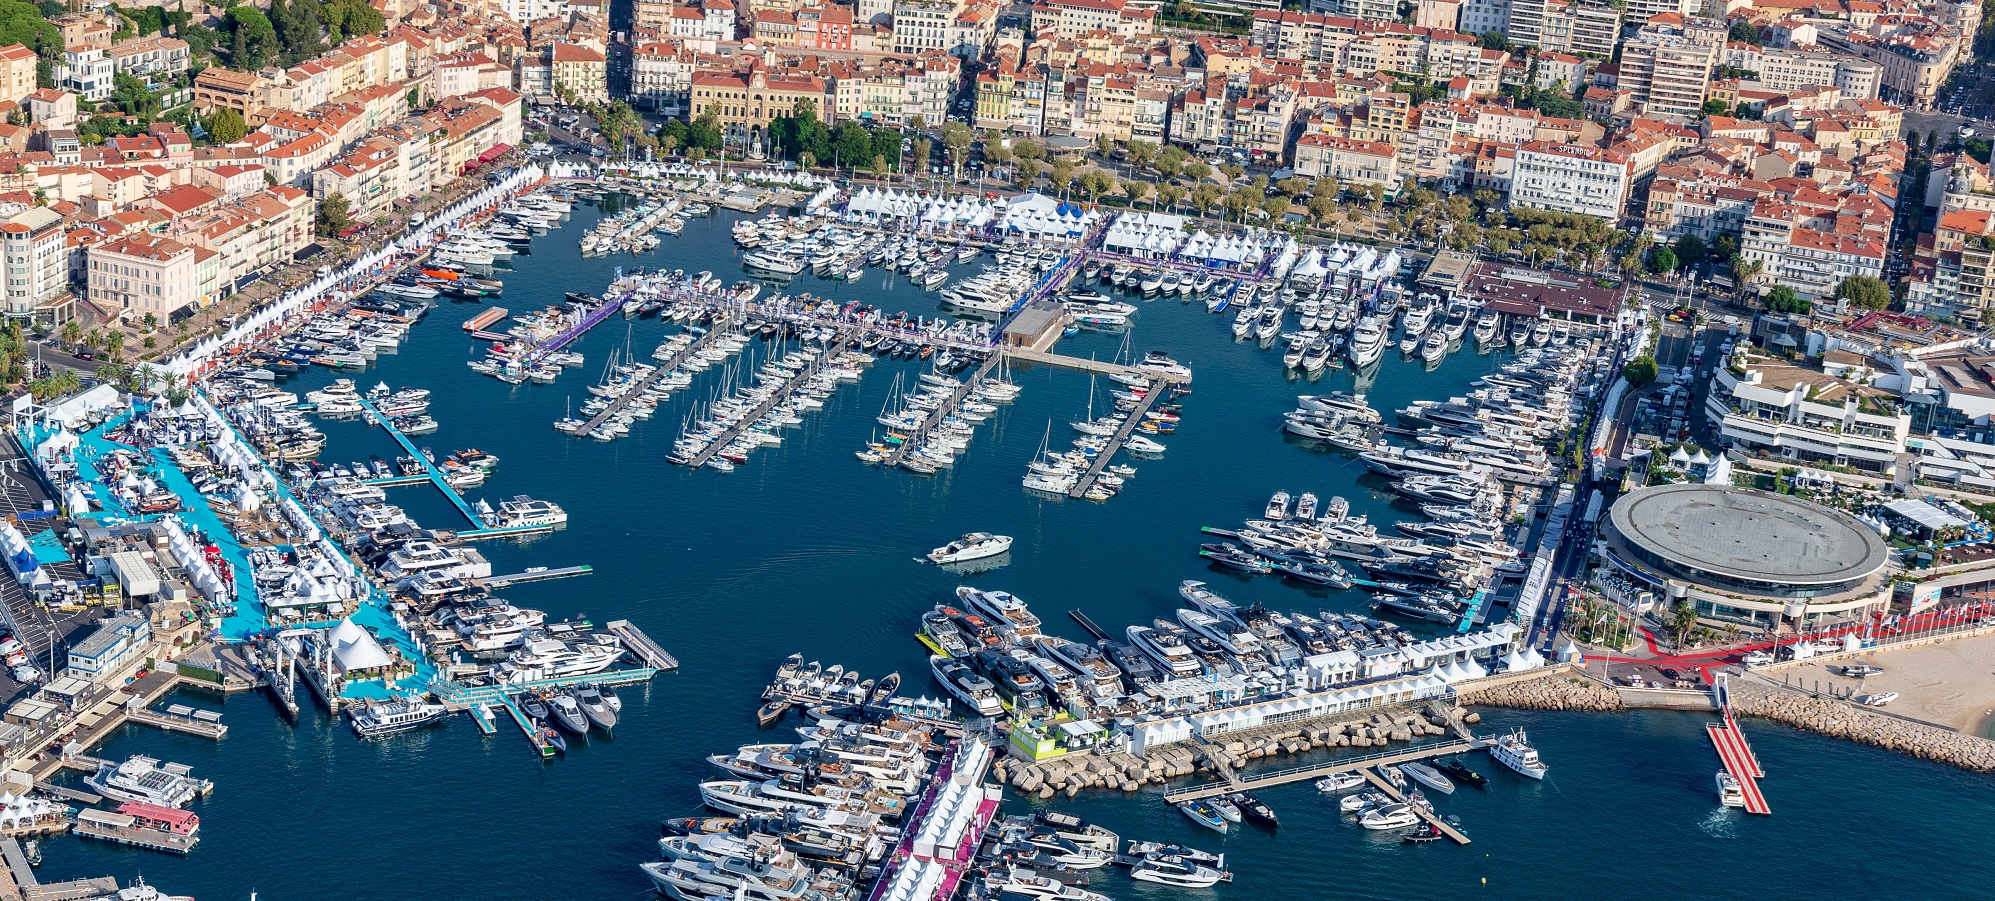 Meet us at Cannes Yachting Festival